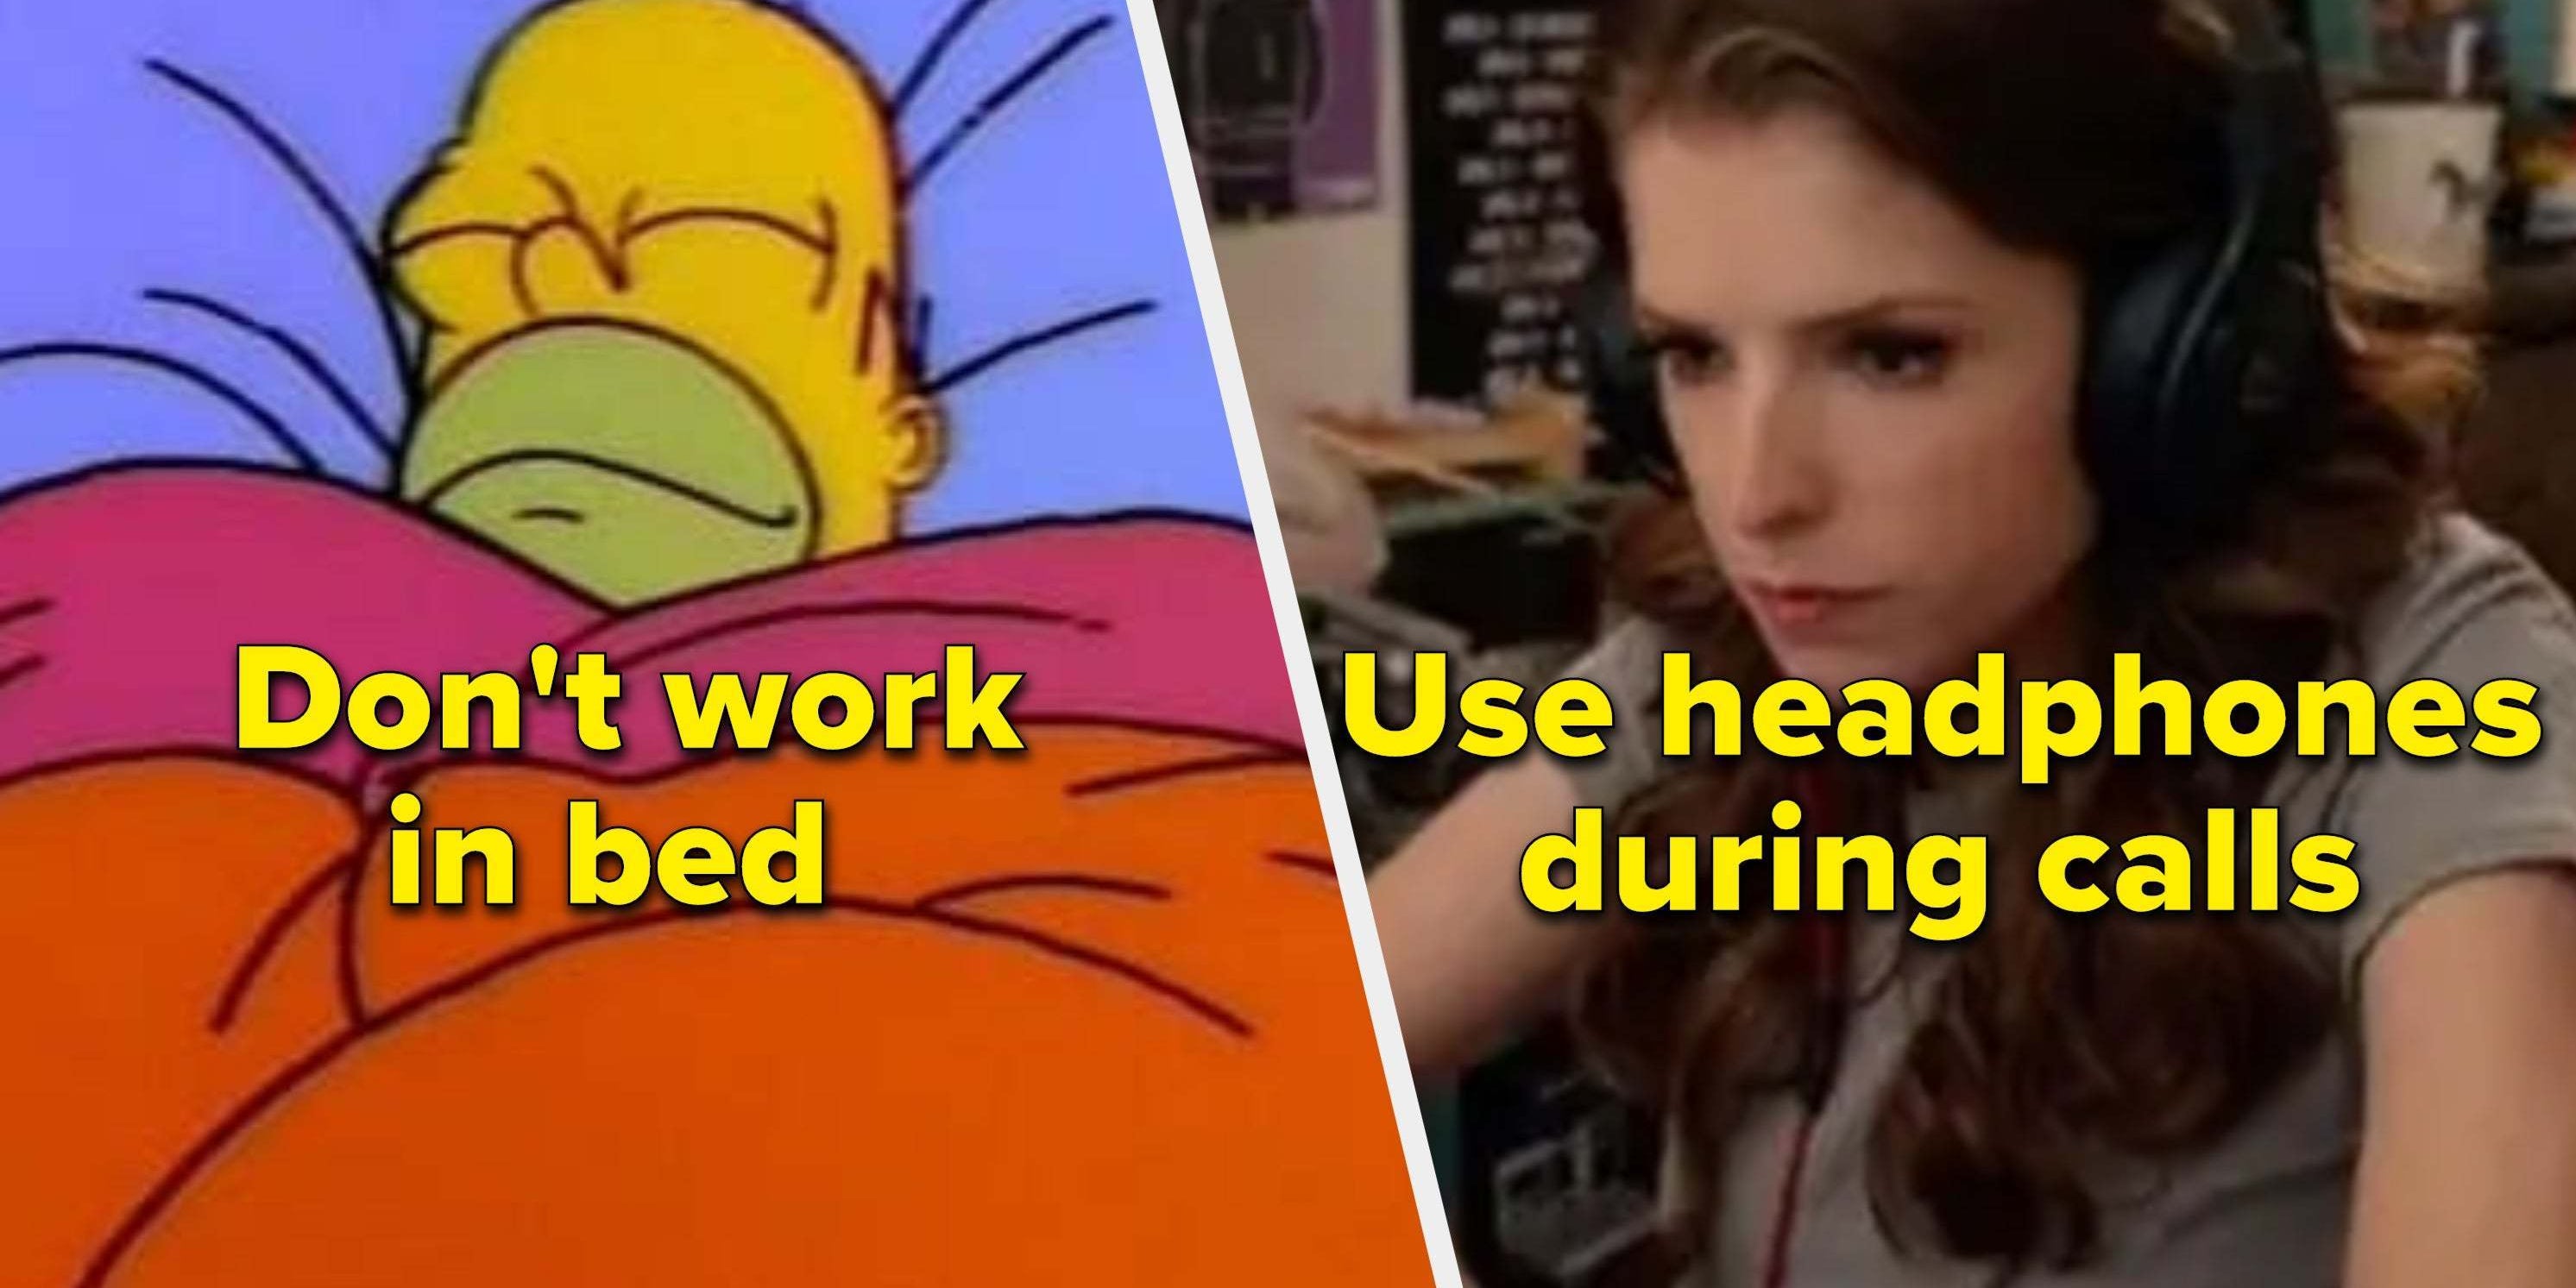 17 Things You Need to Work From Home Better in 2021